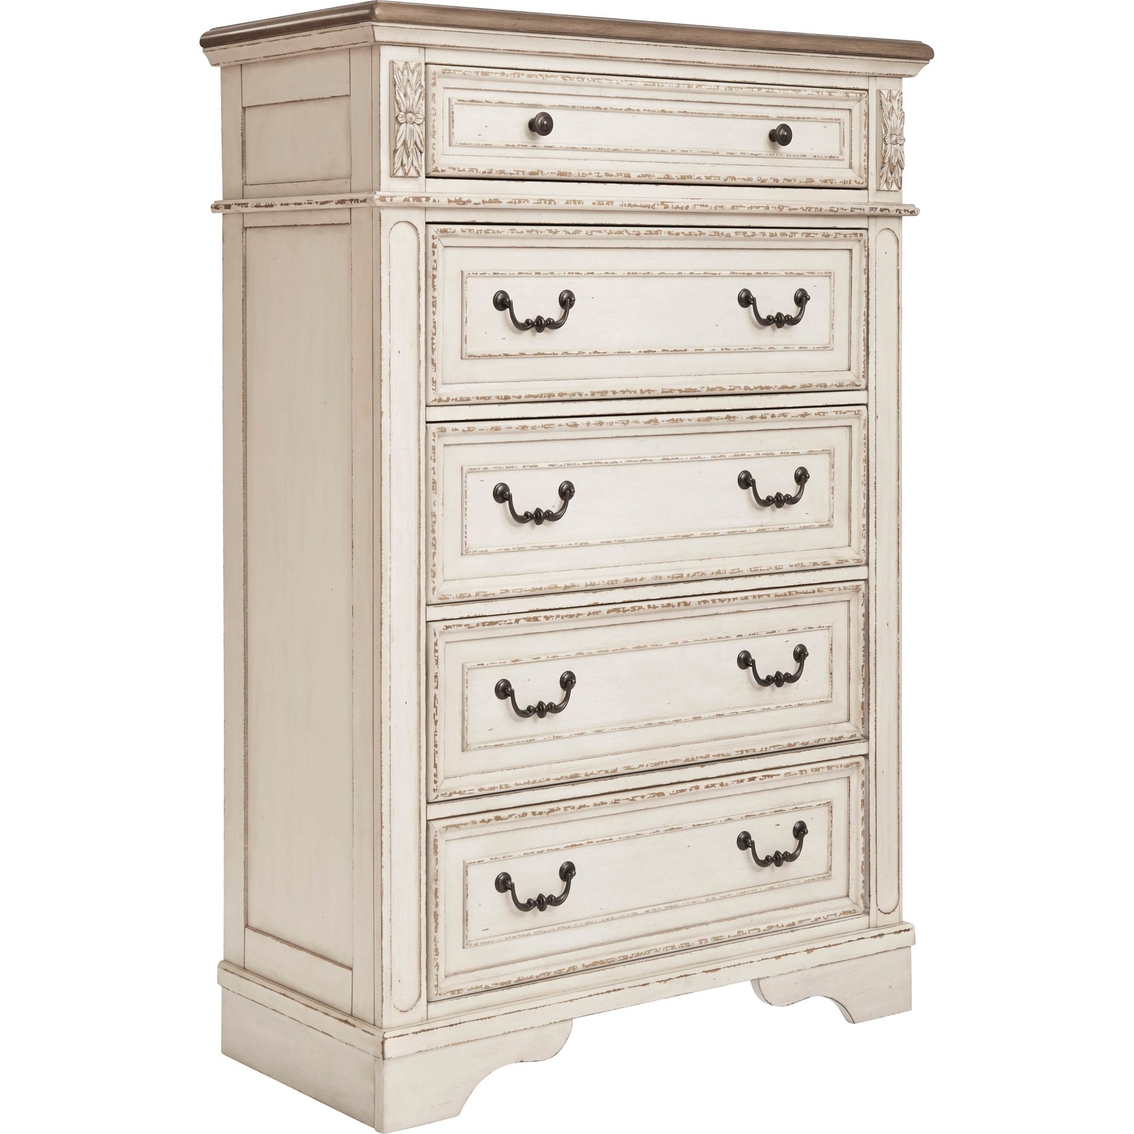 Signature Design by Ashley Realyn 5 Drawer Chest - Image 2 of 4